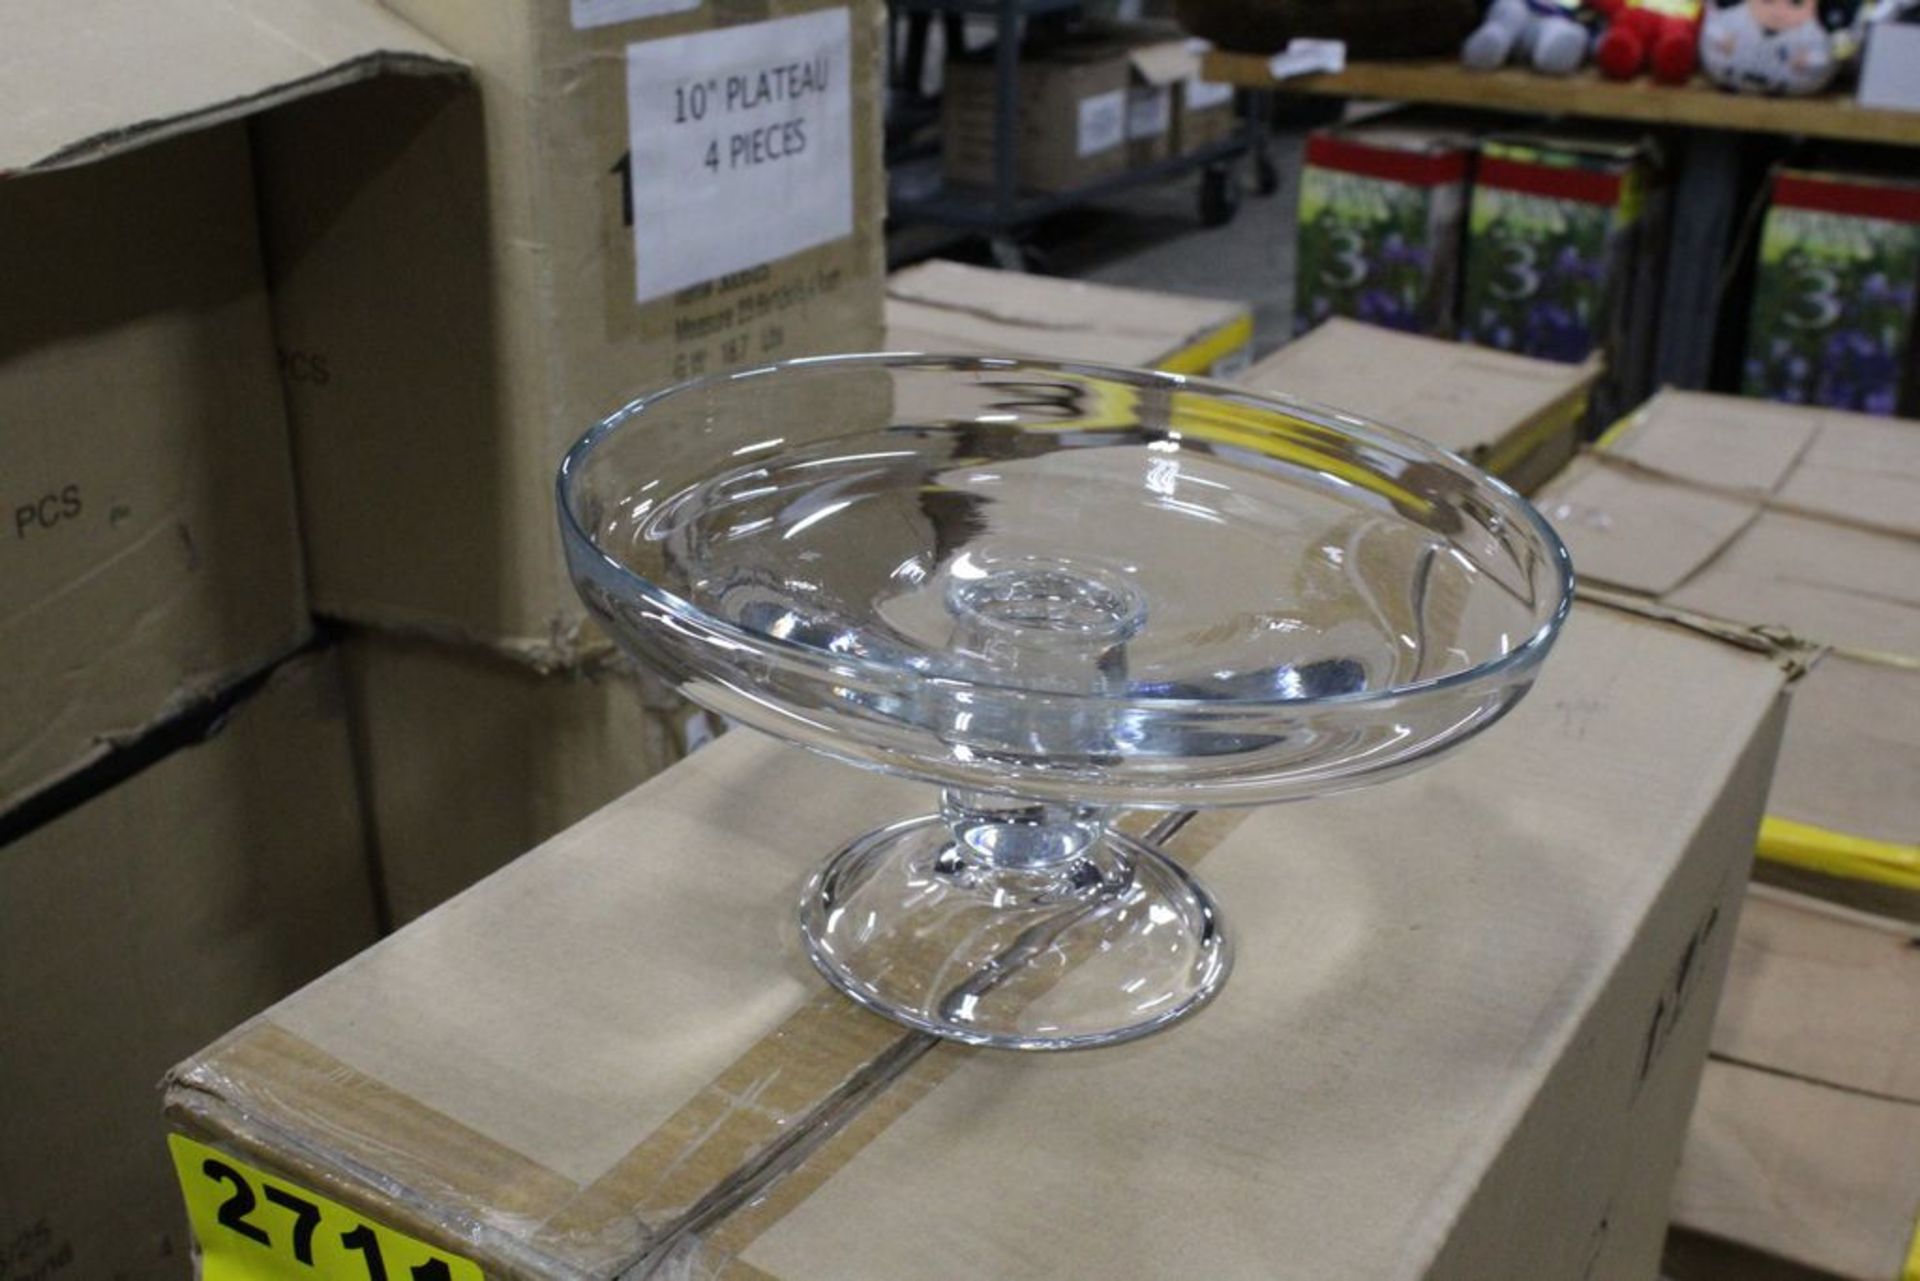 APPROX 20, 10" PLATEAU GLASSWARE STANDS